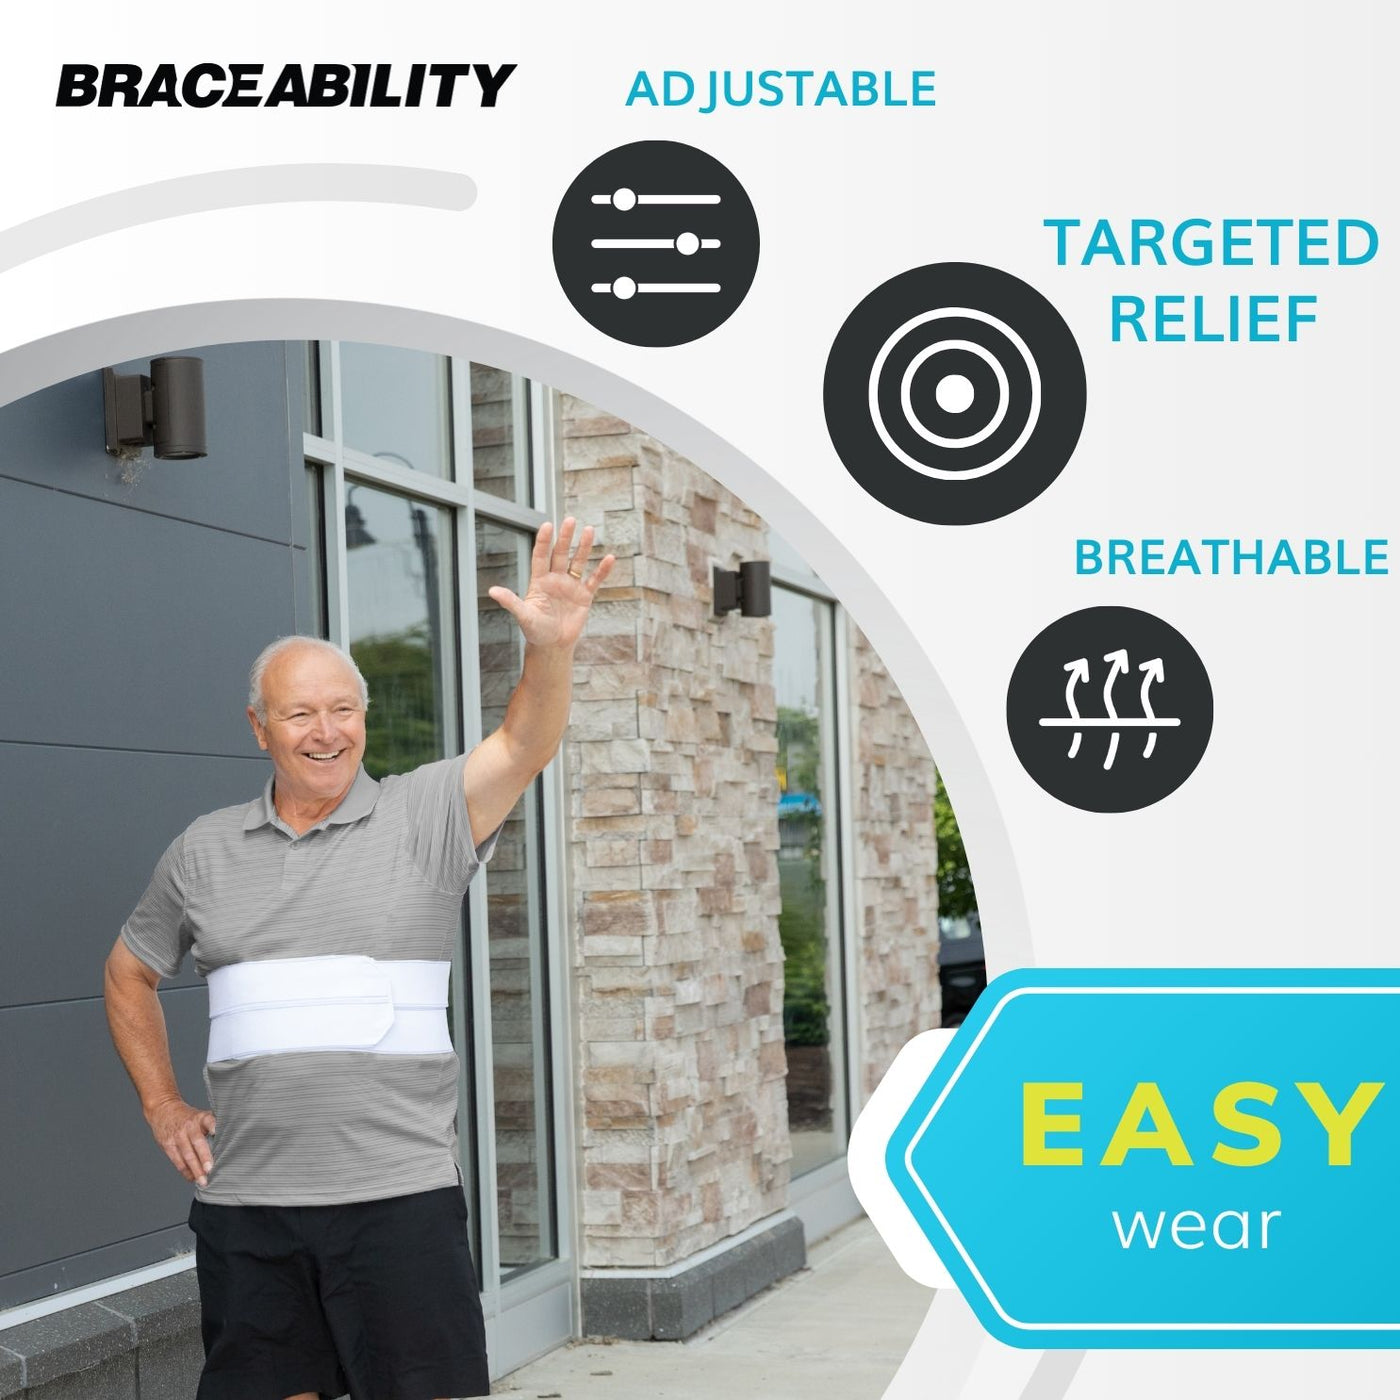 The breathable broken rib brace has adjustable straps to get targeted pain relief for cracked or dislocated ribs